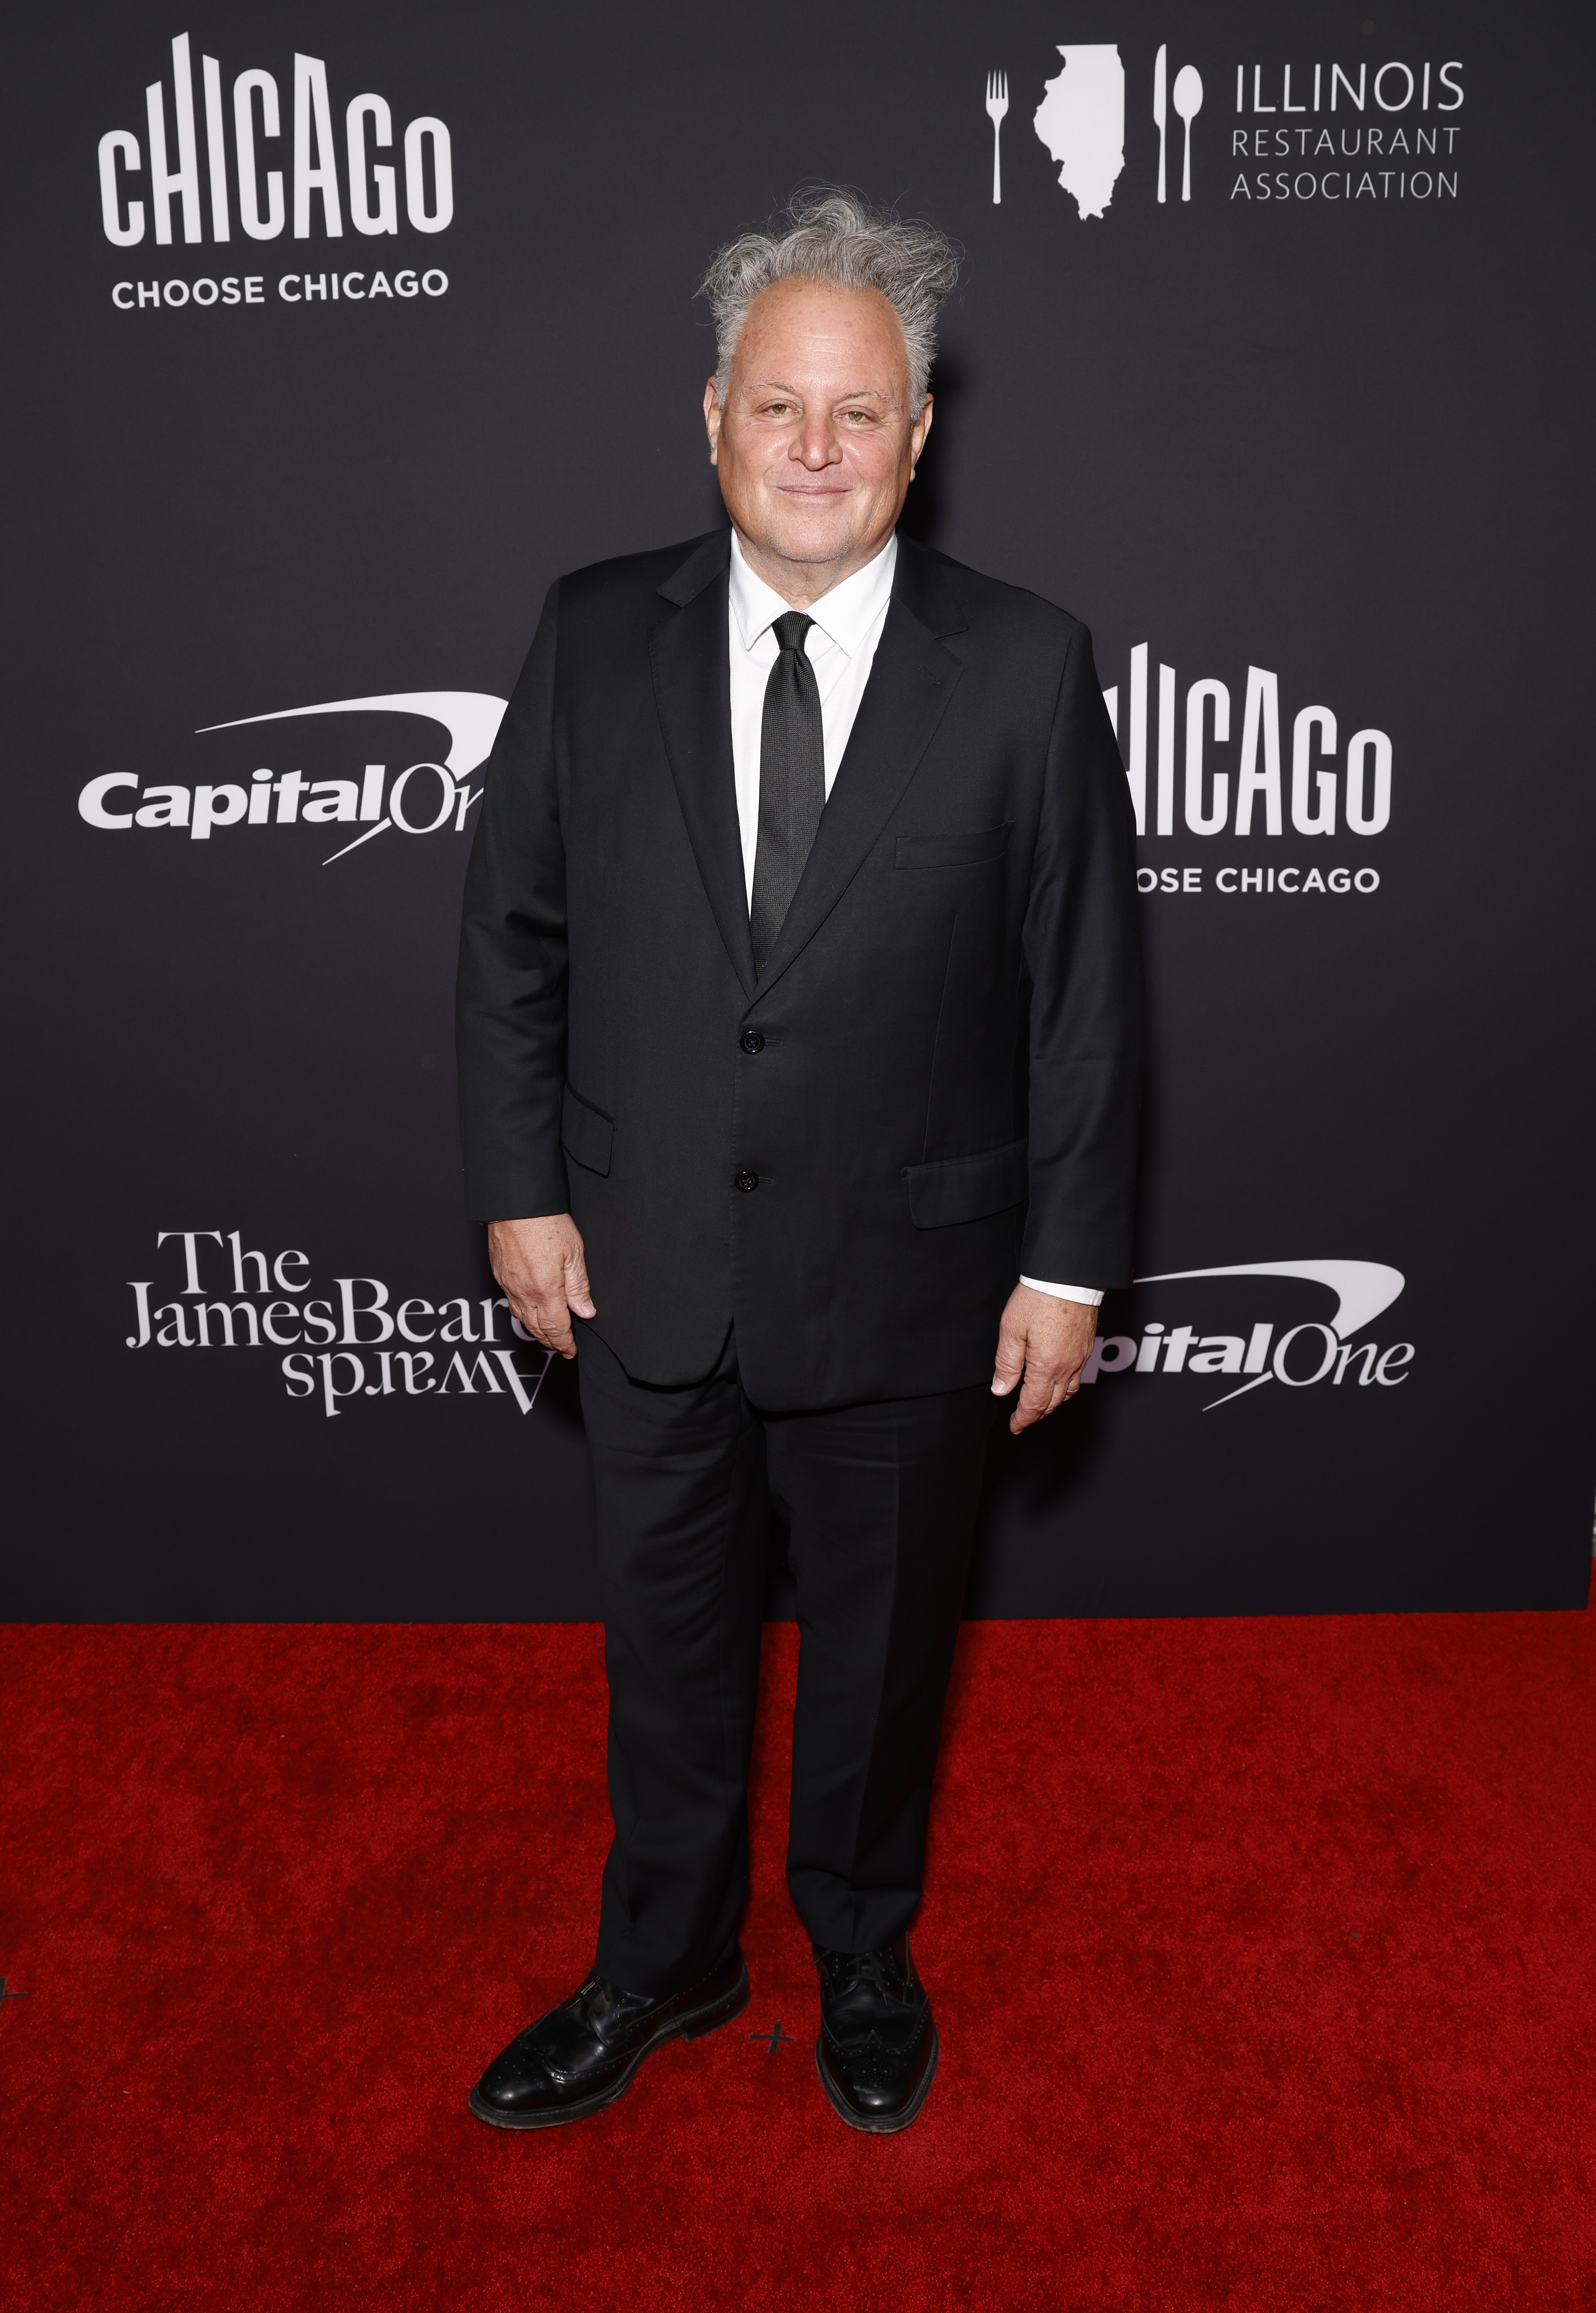 Chris Bianco in a suit at the James Beard Awards.